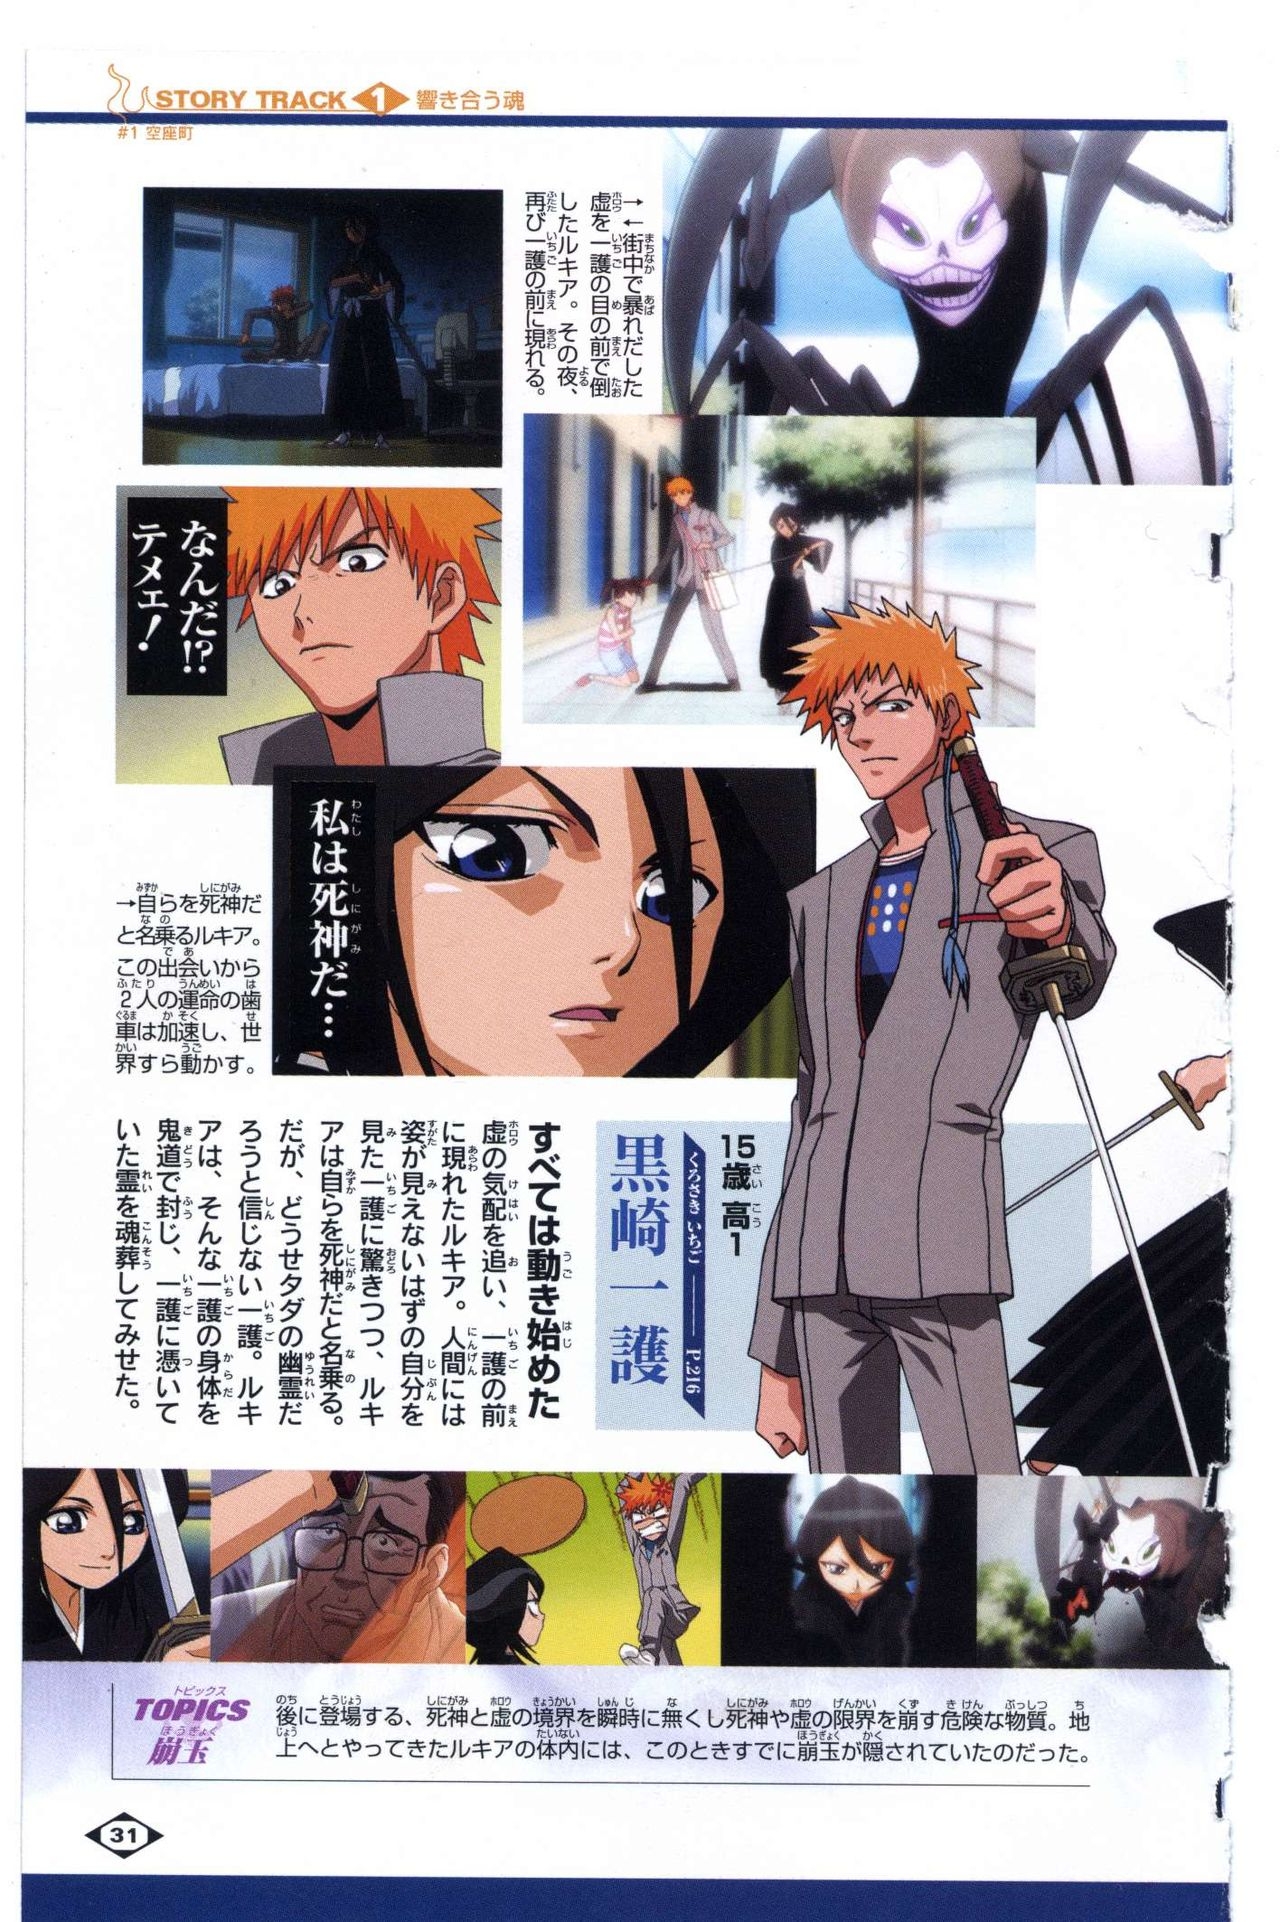 Bleach: Official Animation Book VIBEs 31